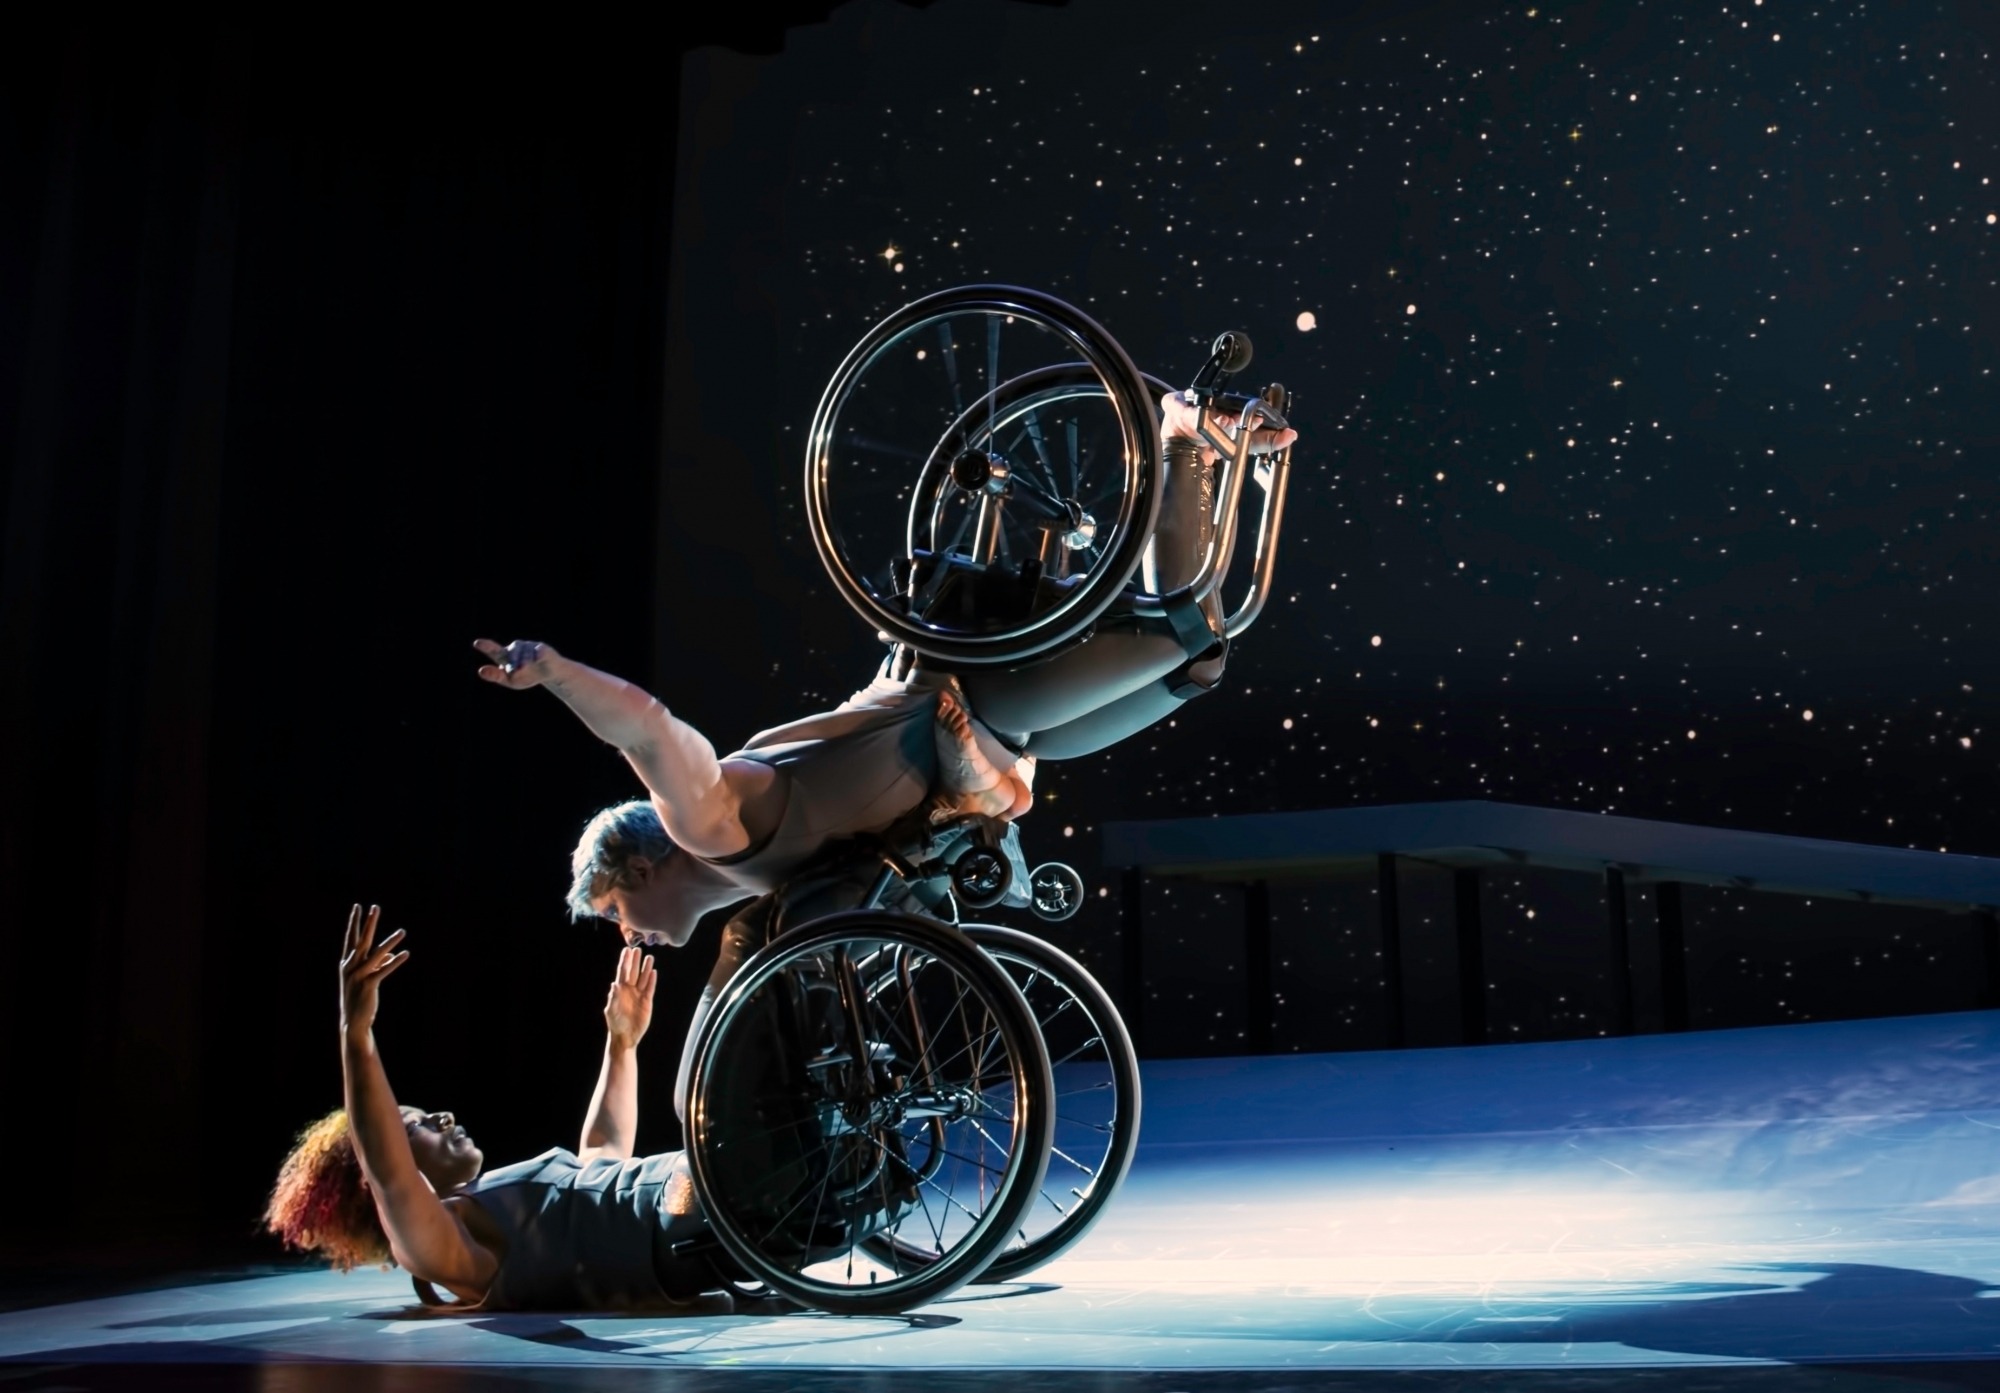 Two dancers on stage performing with wheelchairs.